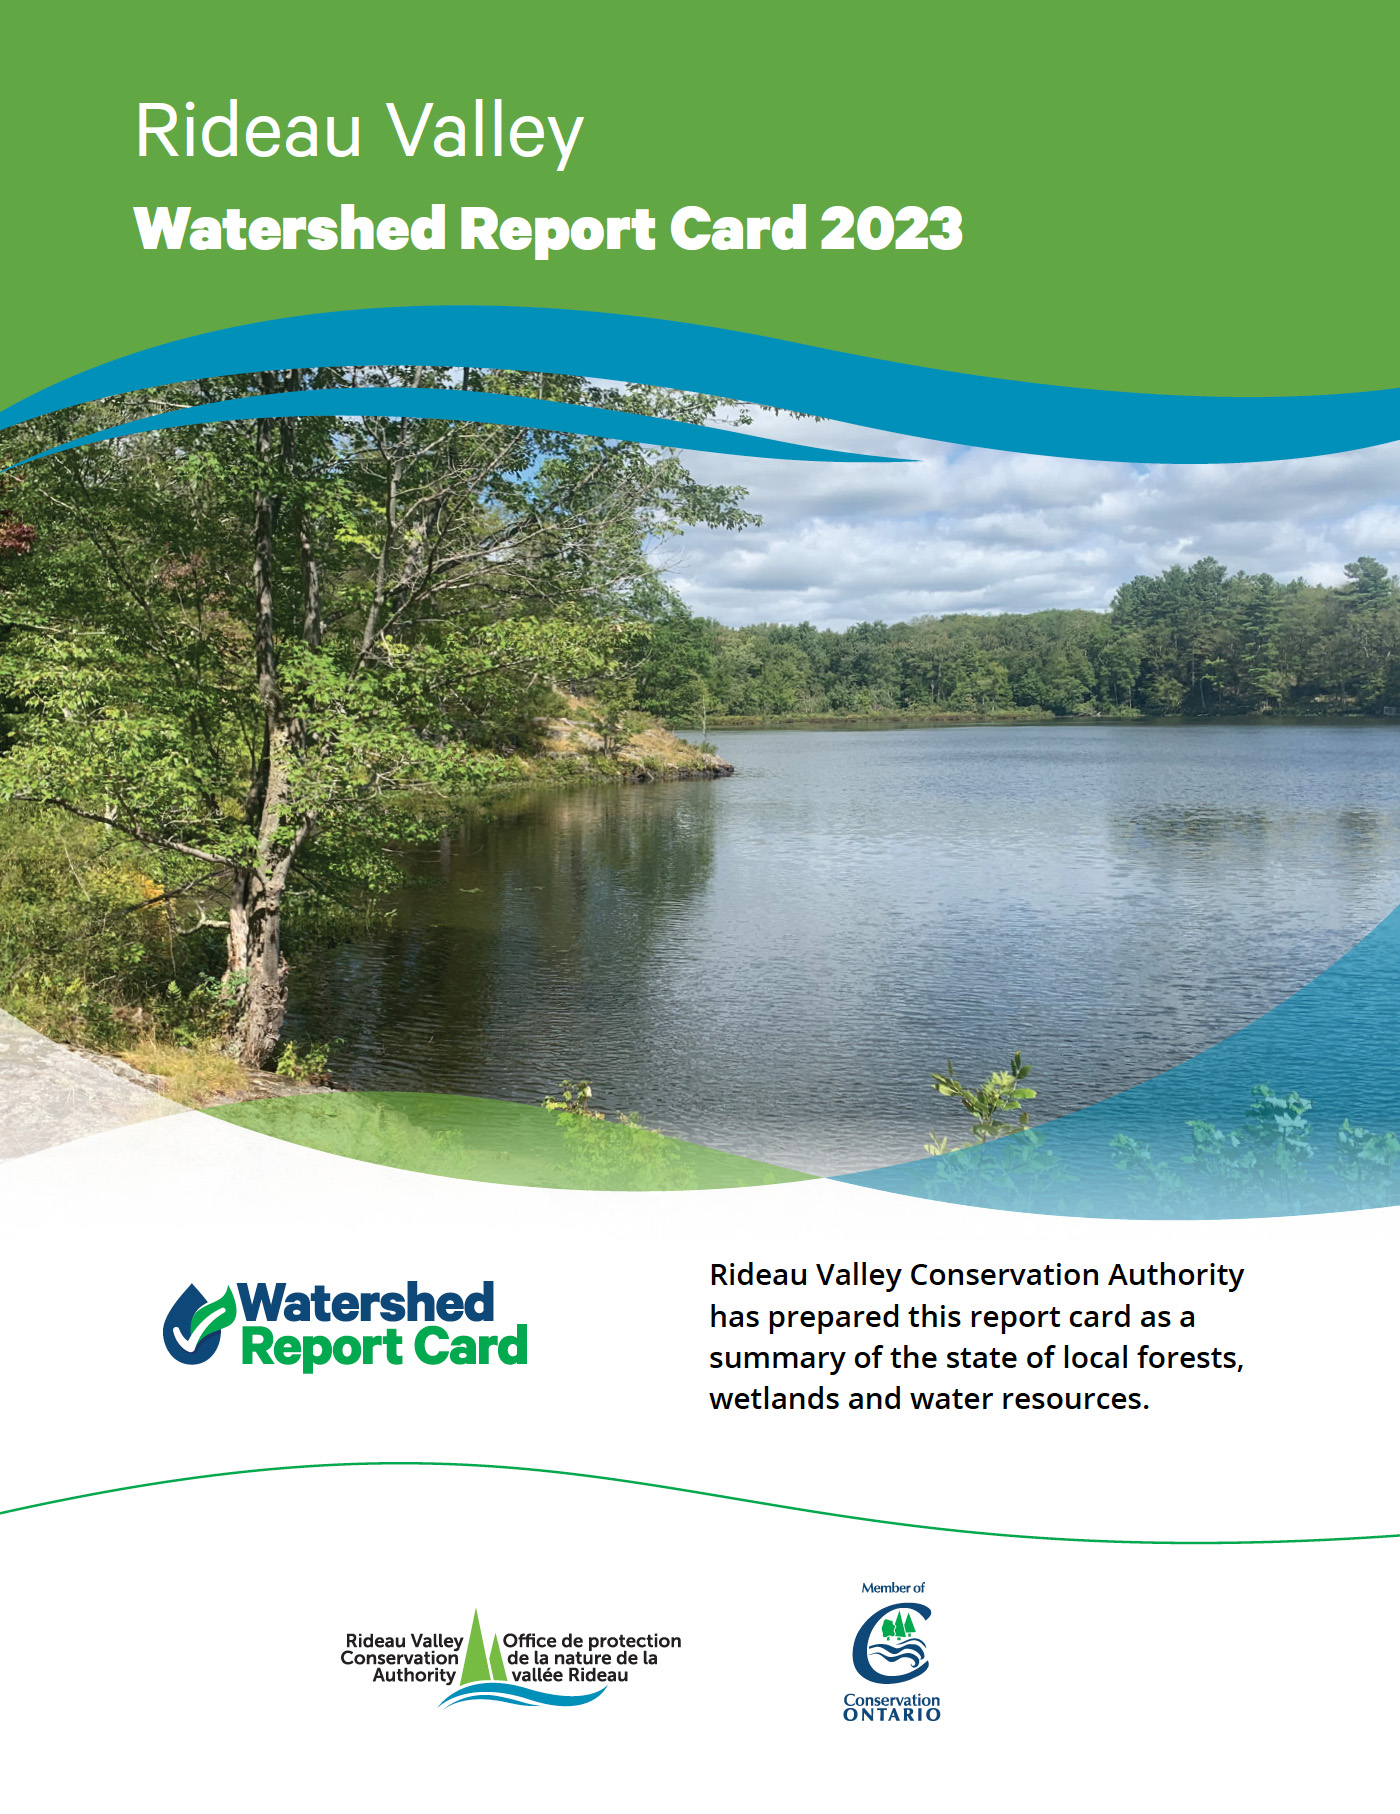 RVCA watershed reportcard 2023